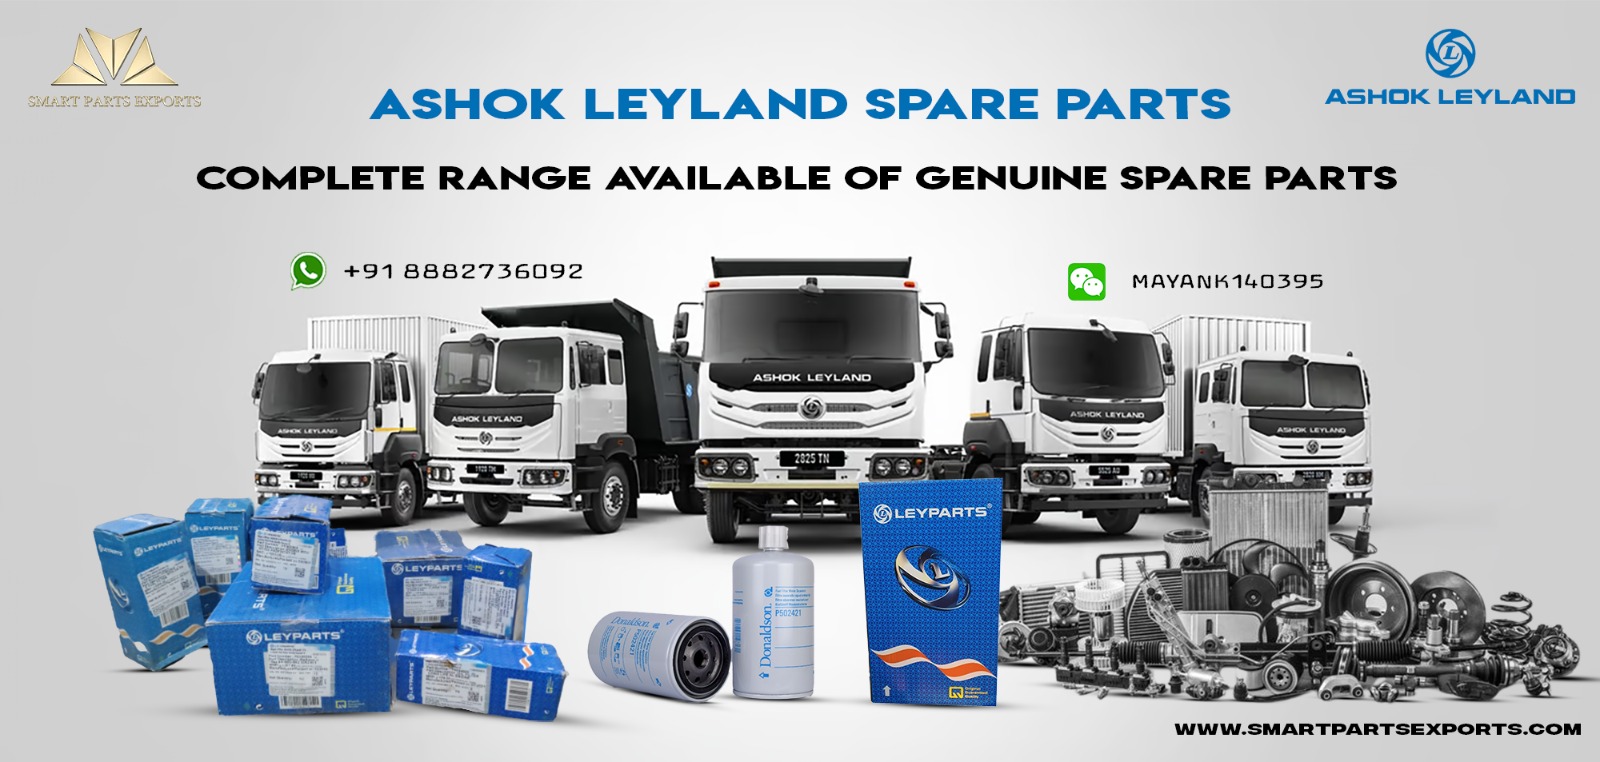 Buy Ashok Leyland spare parts from India